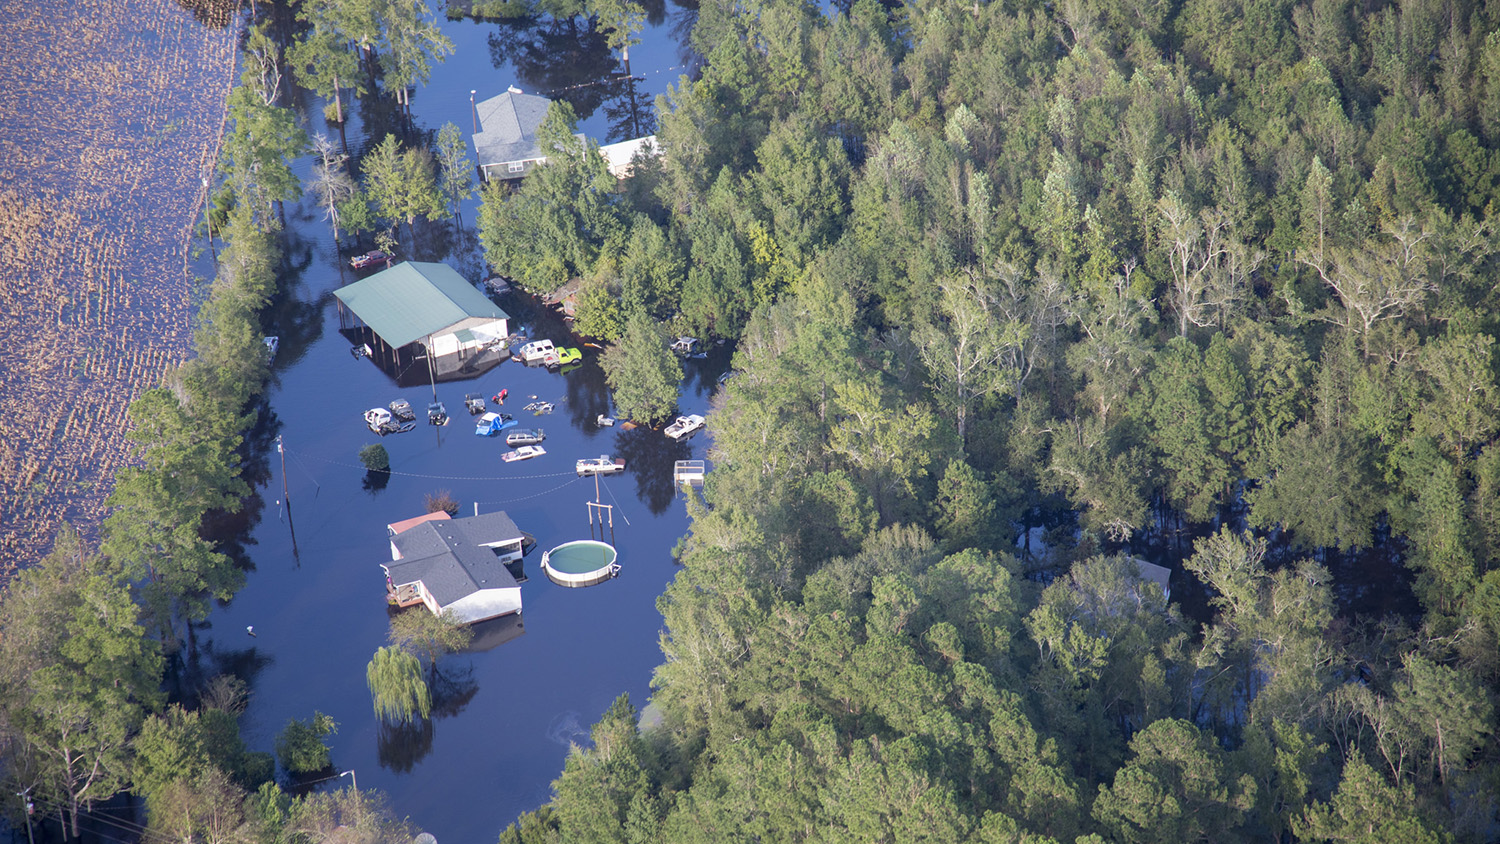 Hurricane Florence causes the Cape Fear River to flood, nearly submerging homes, above ground swimming pools, and vehicles.